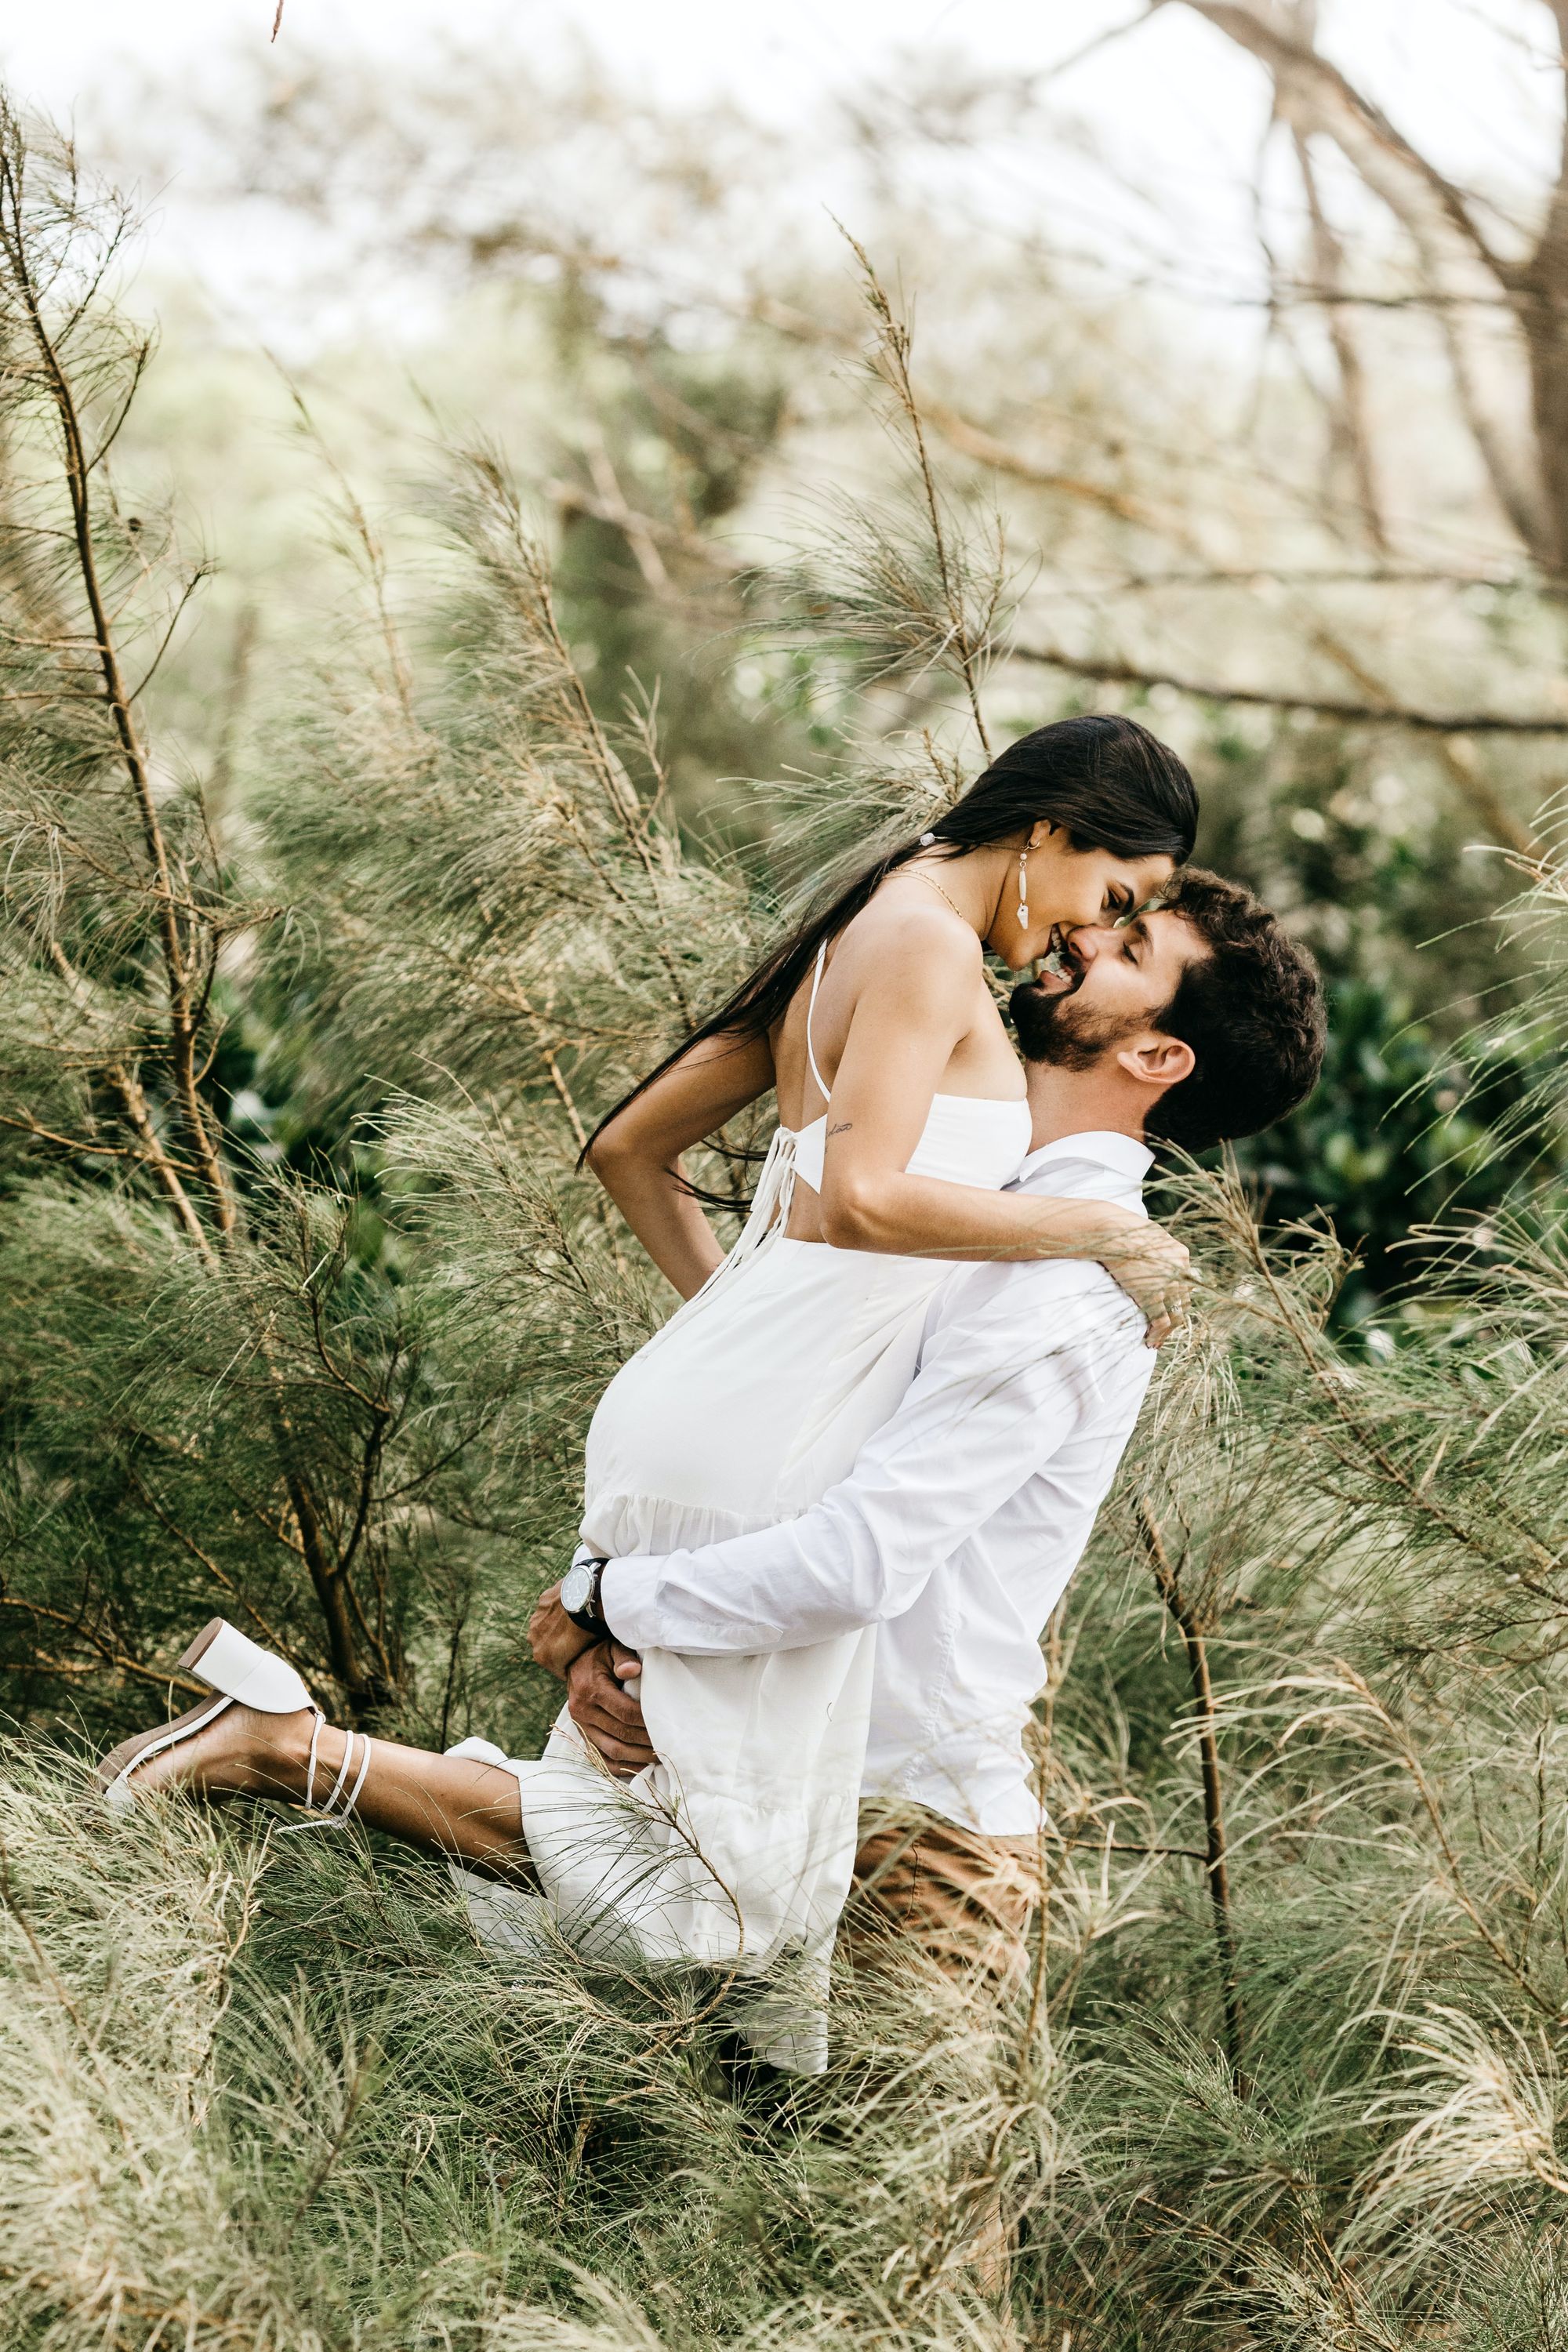 9 Top Wedding Photography Pose Ideas for the Groom